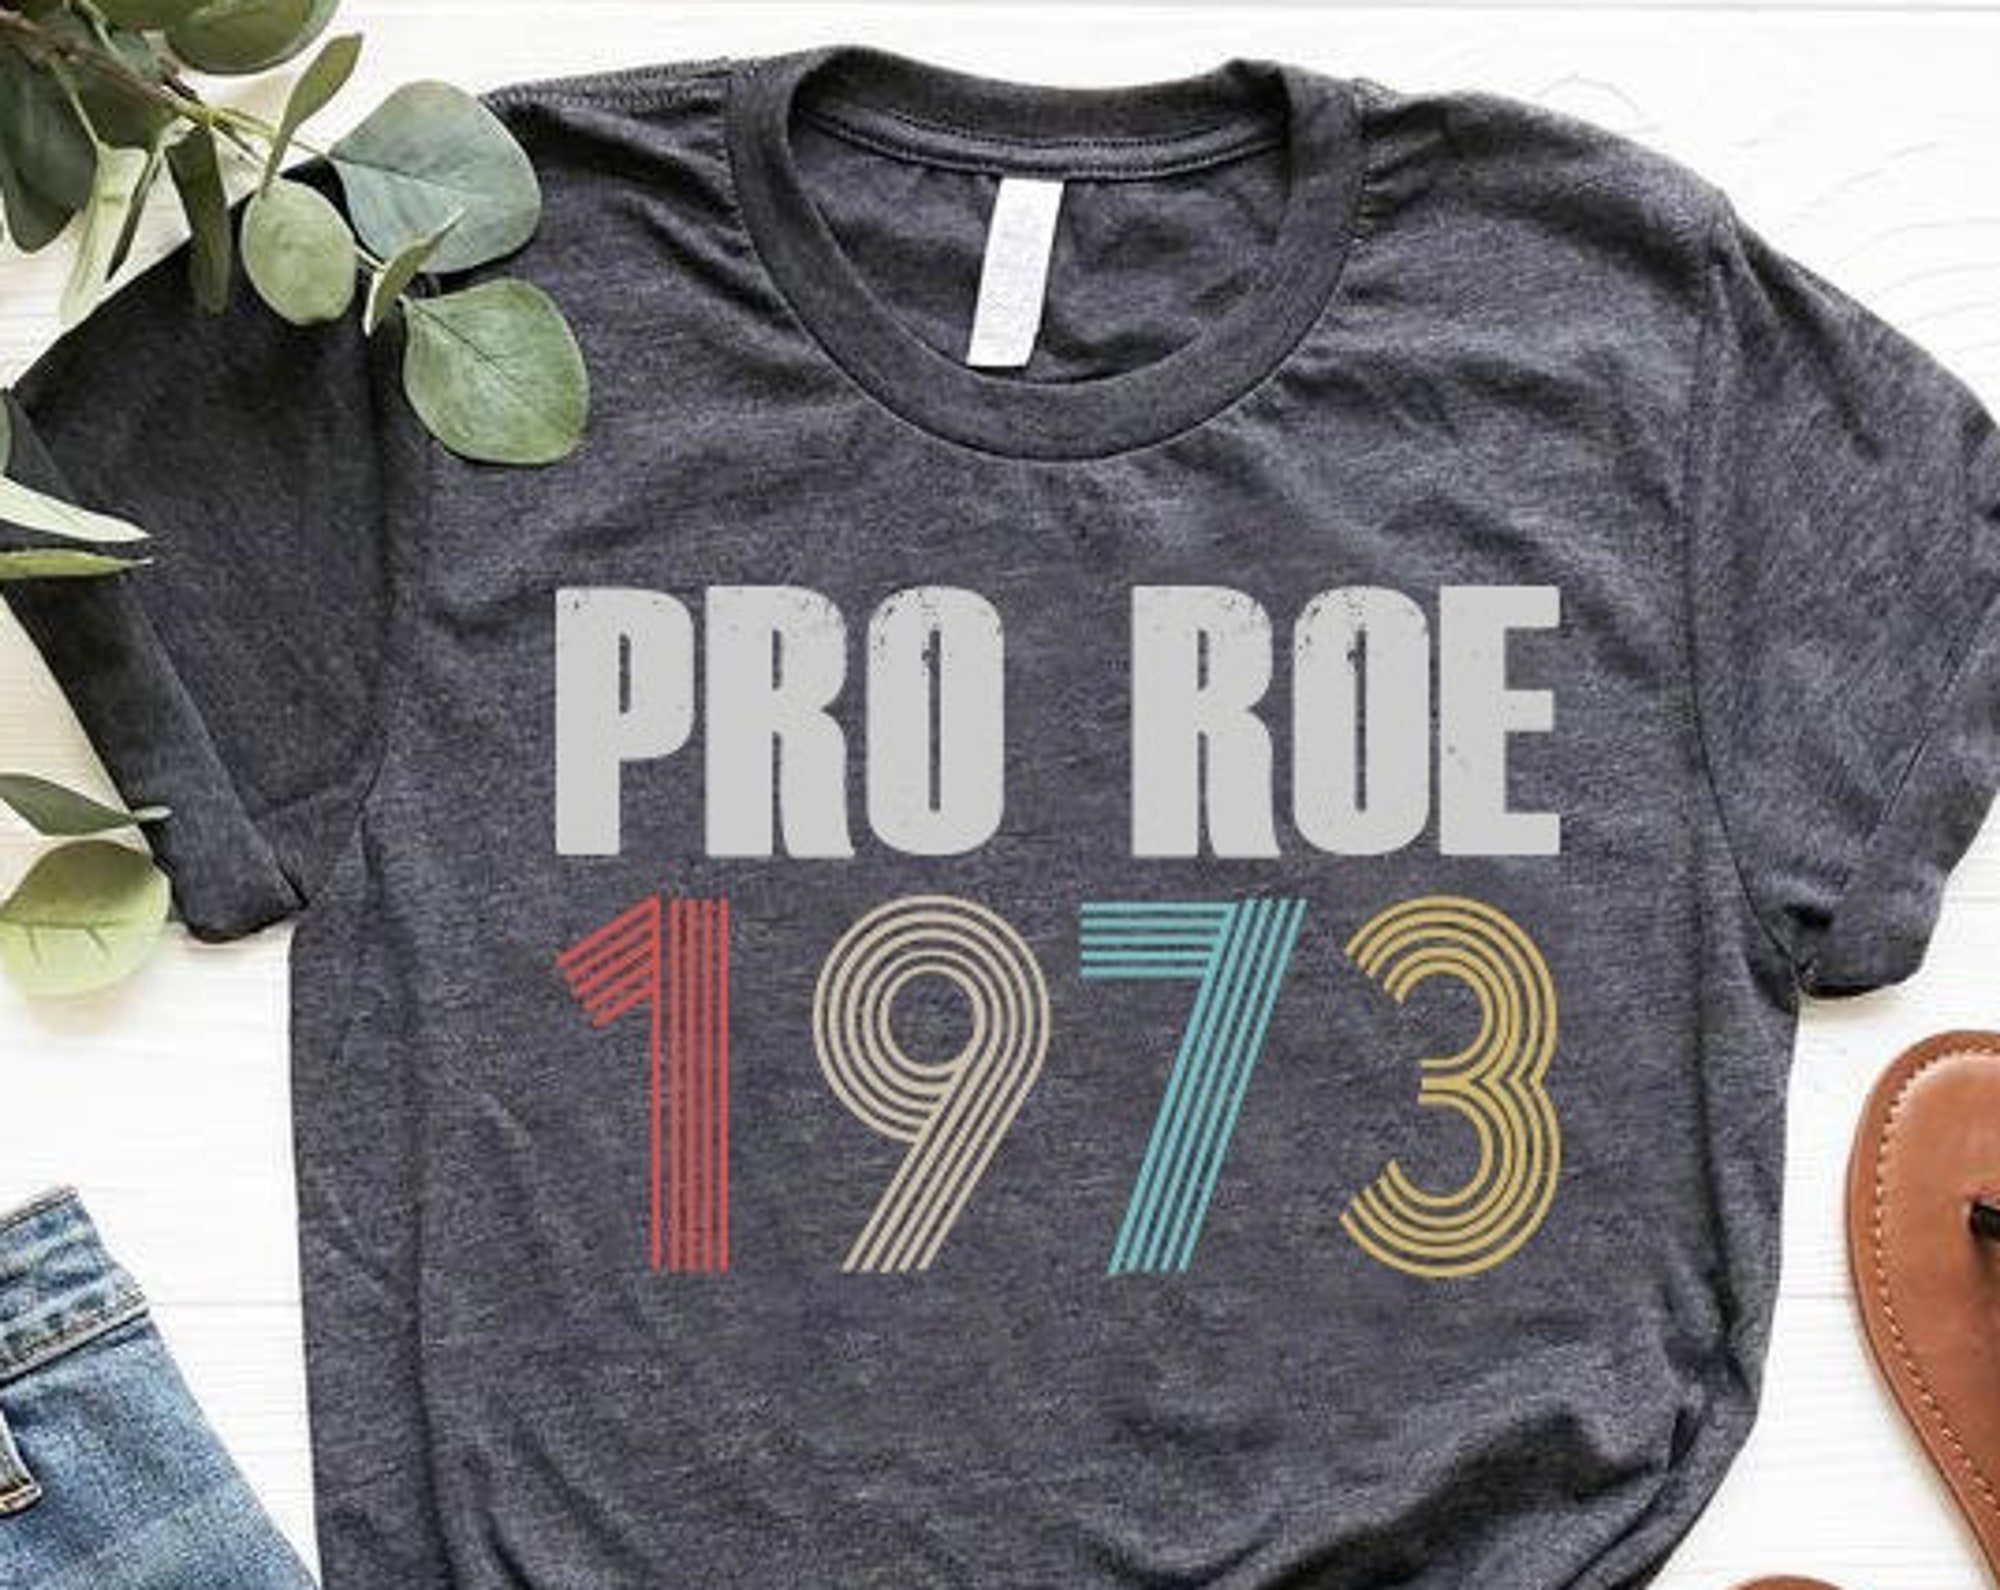 Discover Pro Roe Shirt, Roe V Wade, 1973 Shirt, Pro Choice Shirt, 1973 Shirt, Women Graphic Tee For Abortion,Protest Tee,Activist Tee,Right To Choose